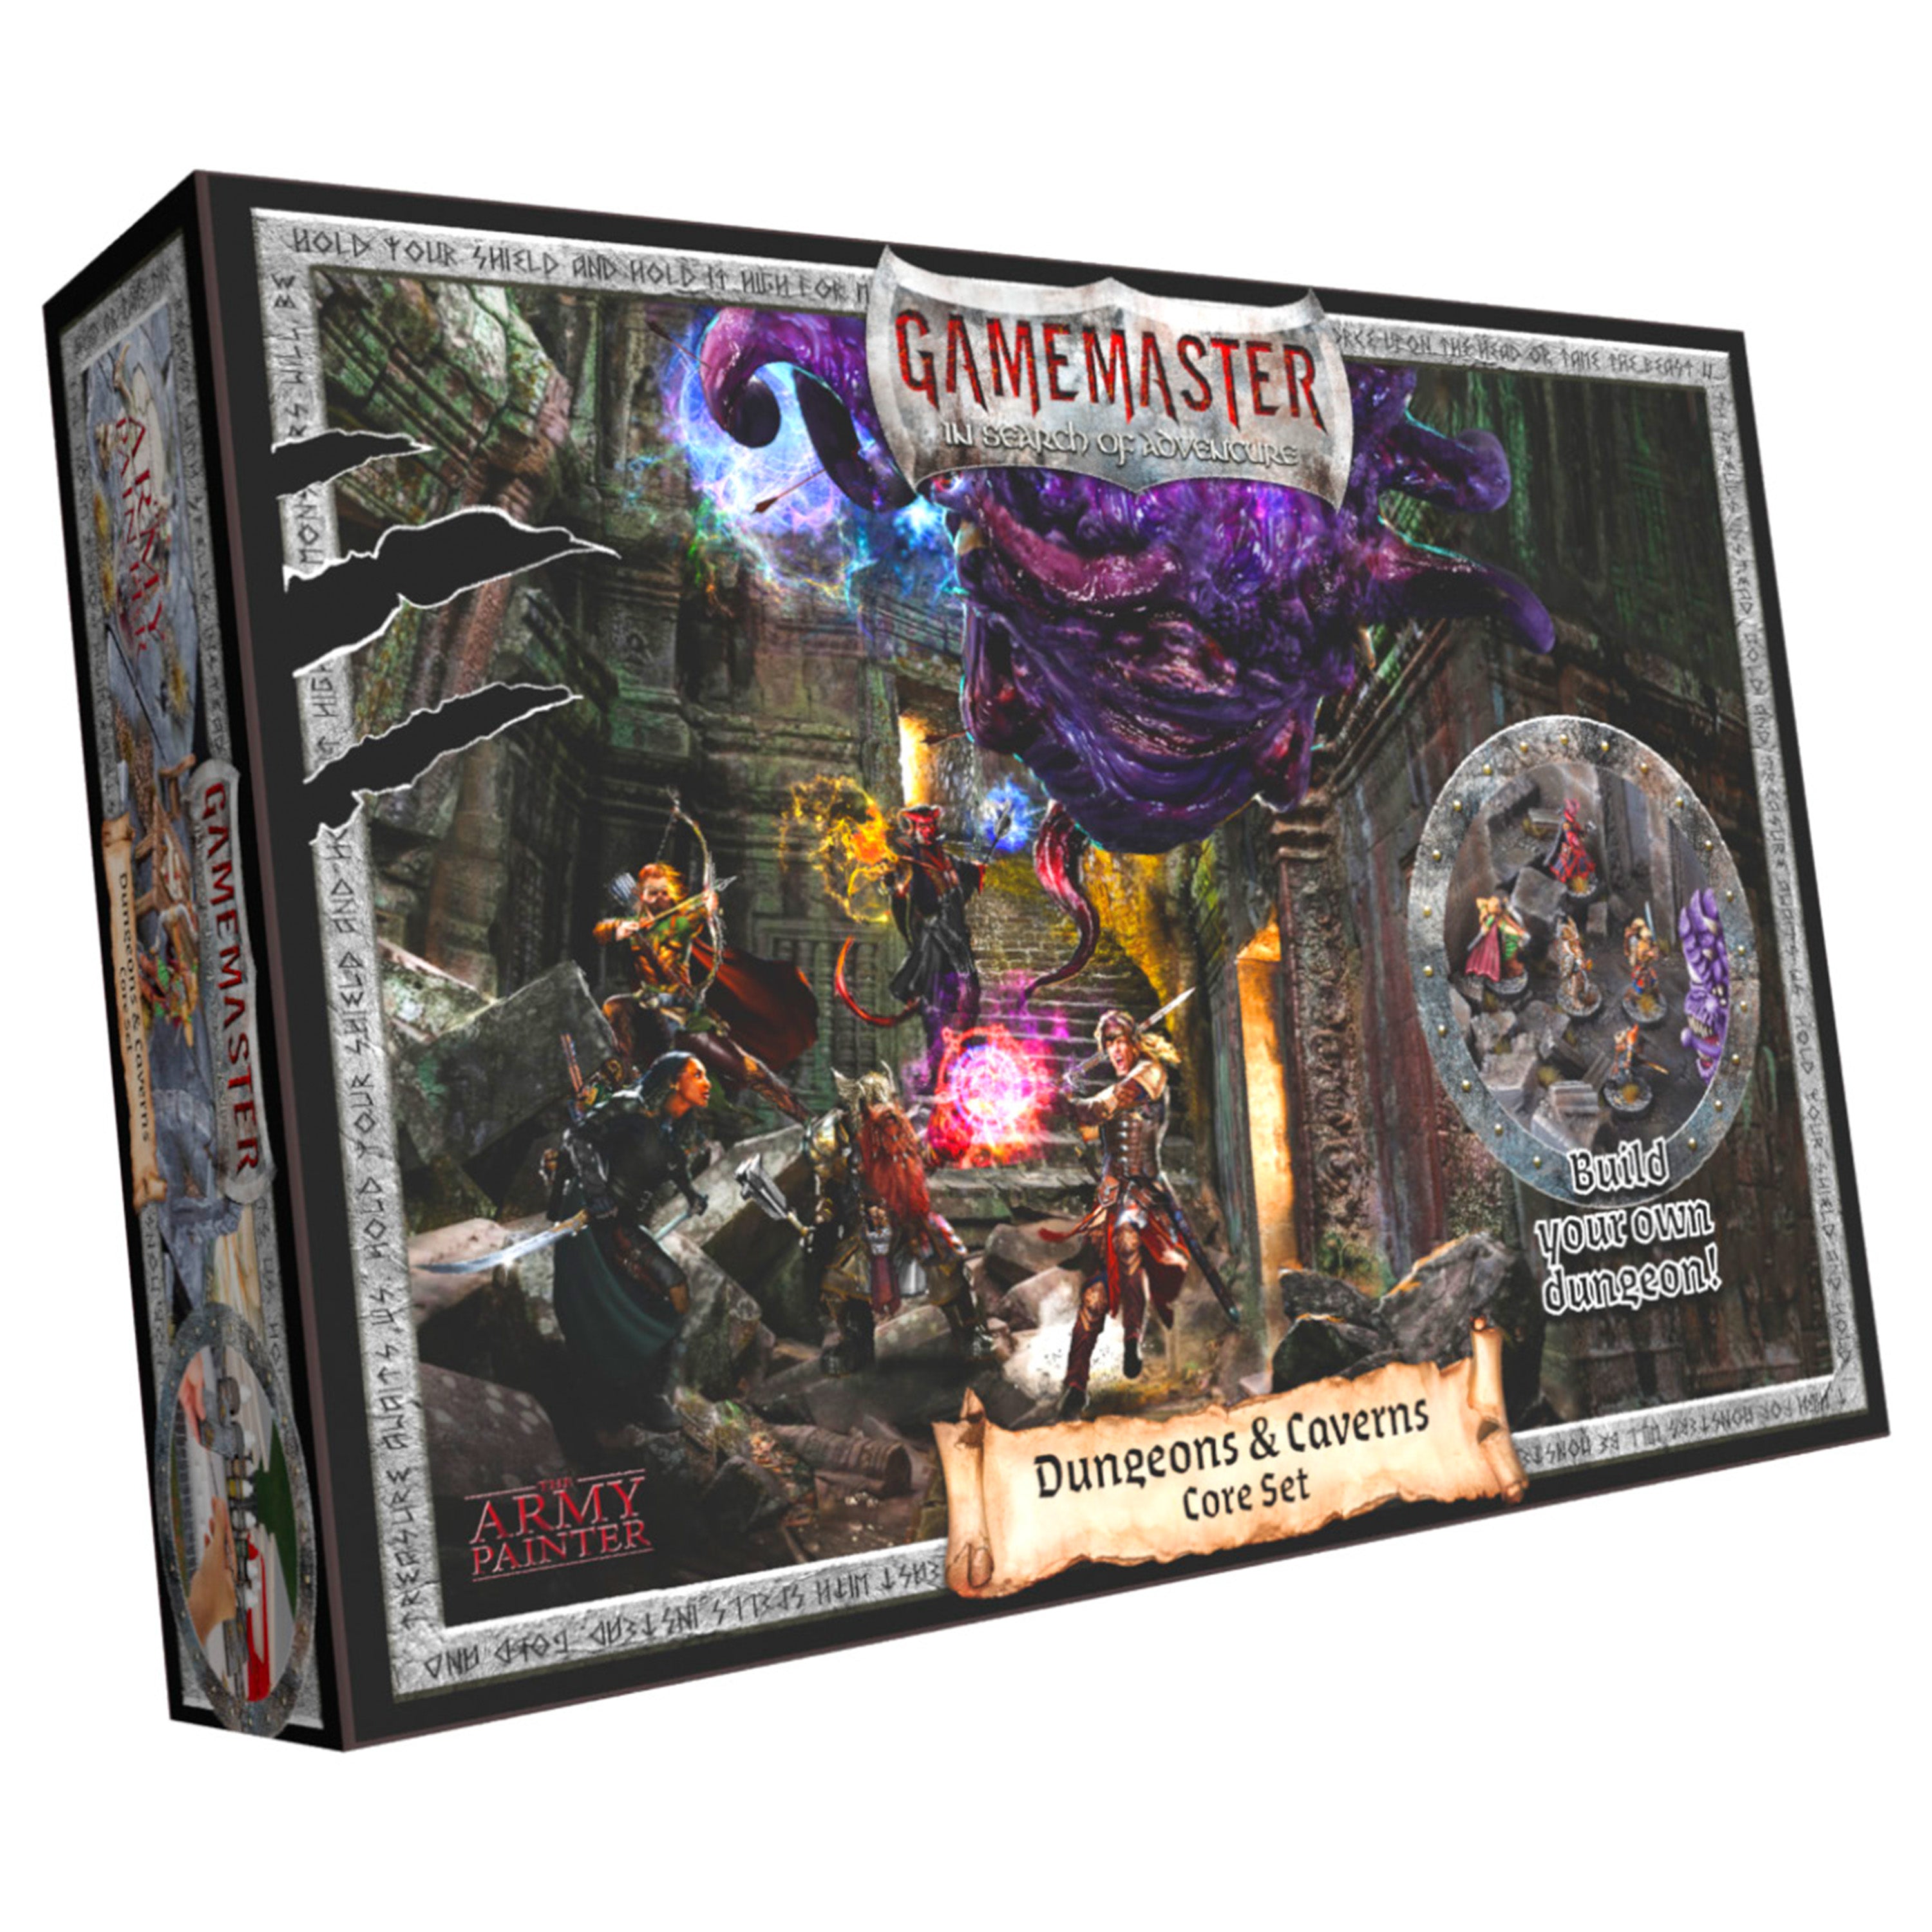 Gamemaster: RPG Character Paint Set Available Now!